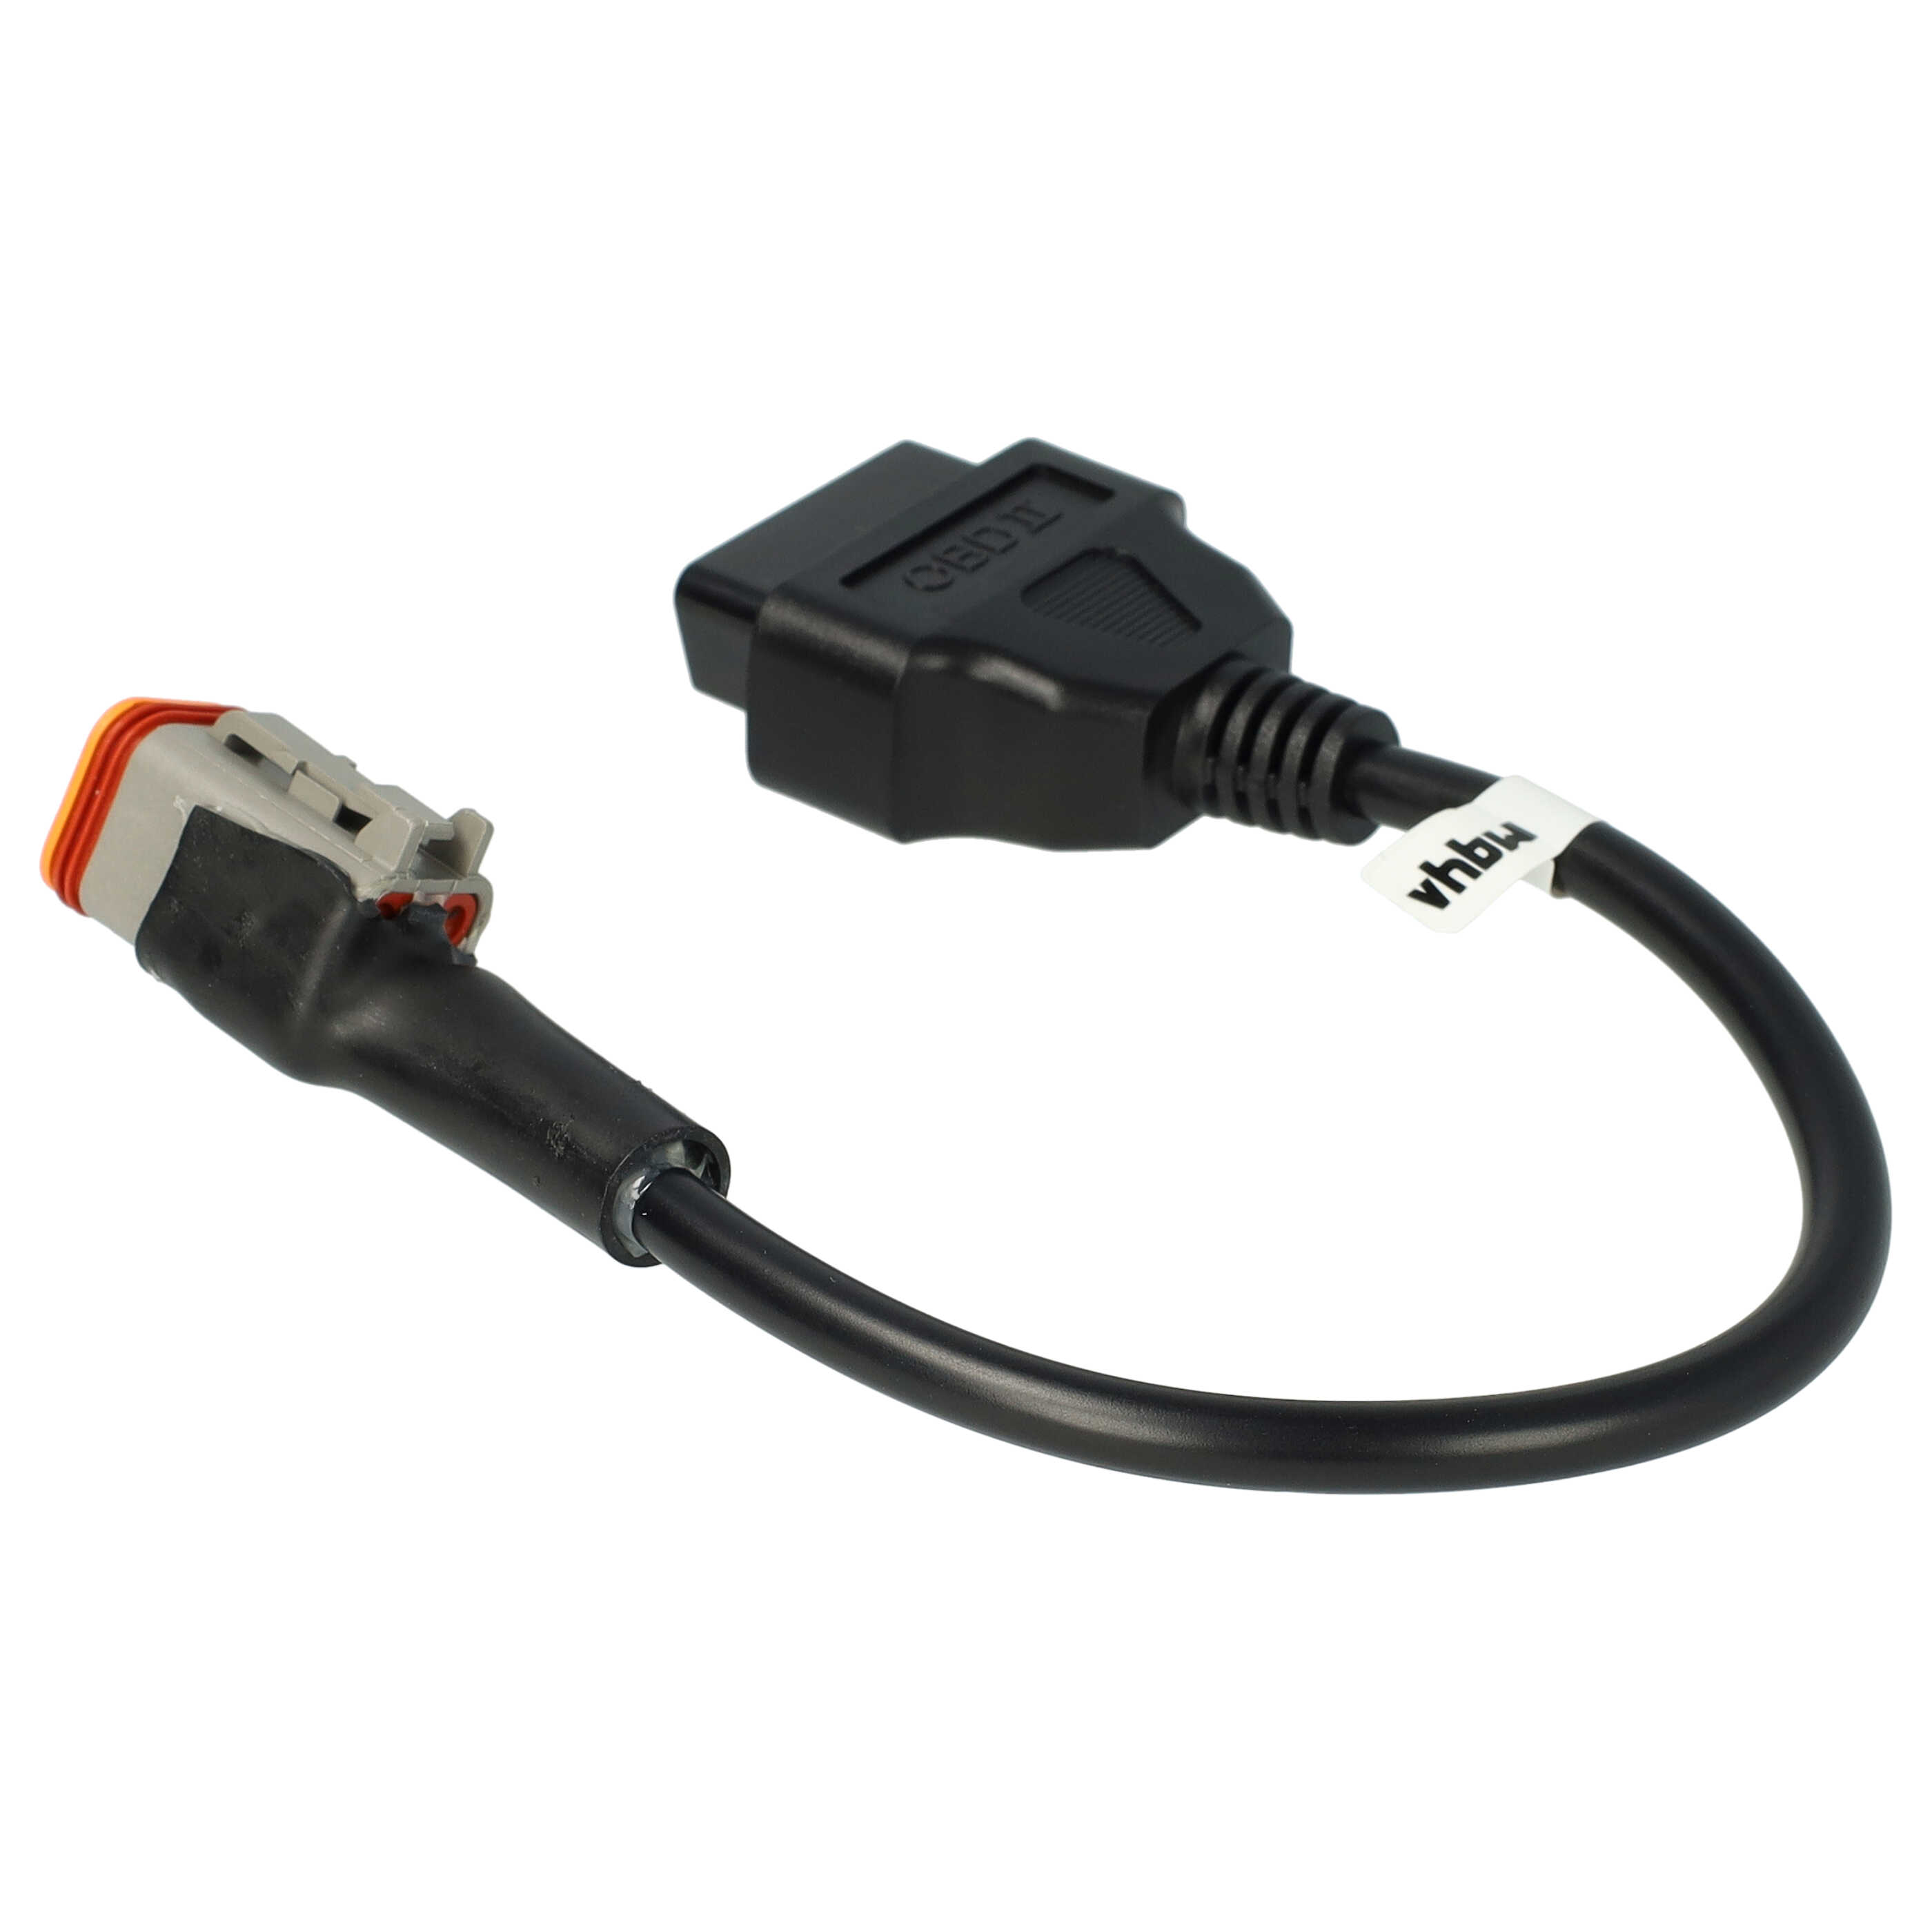 vhbw OBD2 Adapter 6 Pin to OBD2 16Pin suitable for Harley Davidson Motorbike - 28 cm